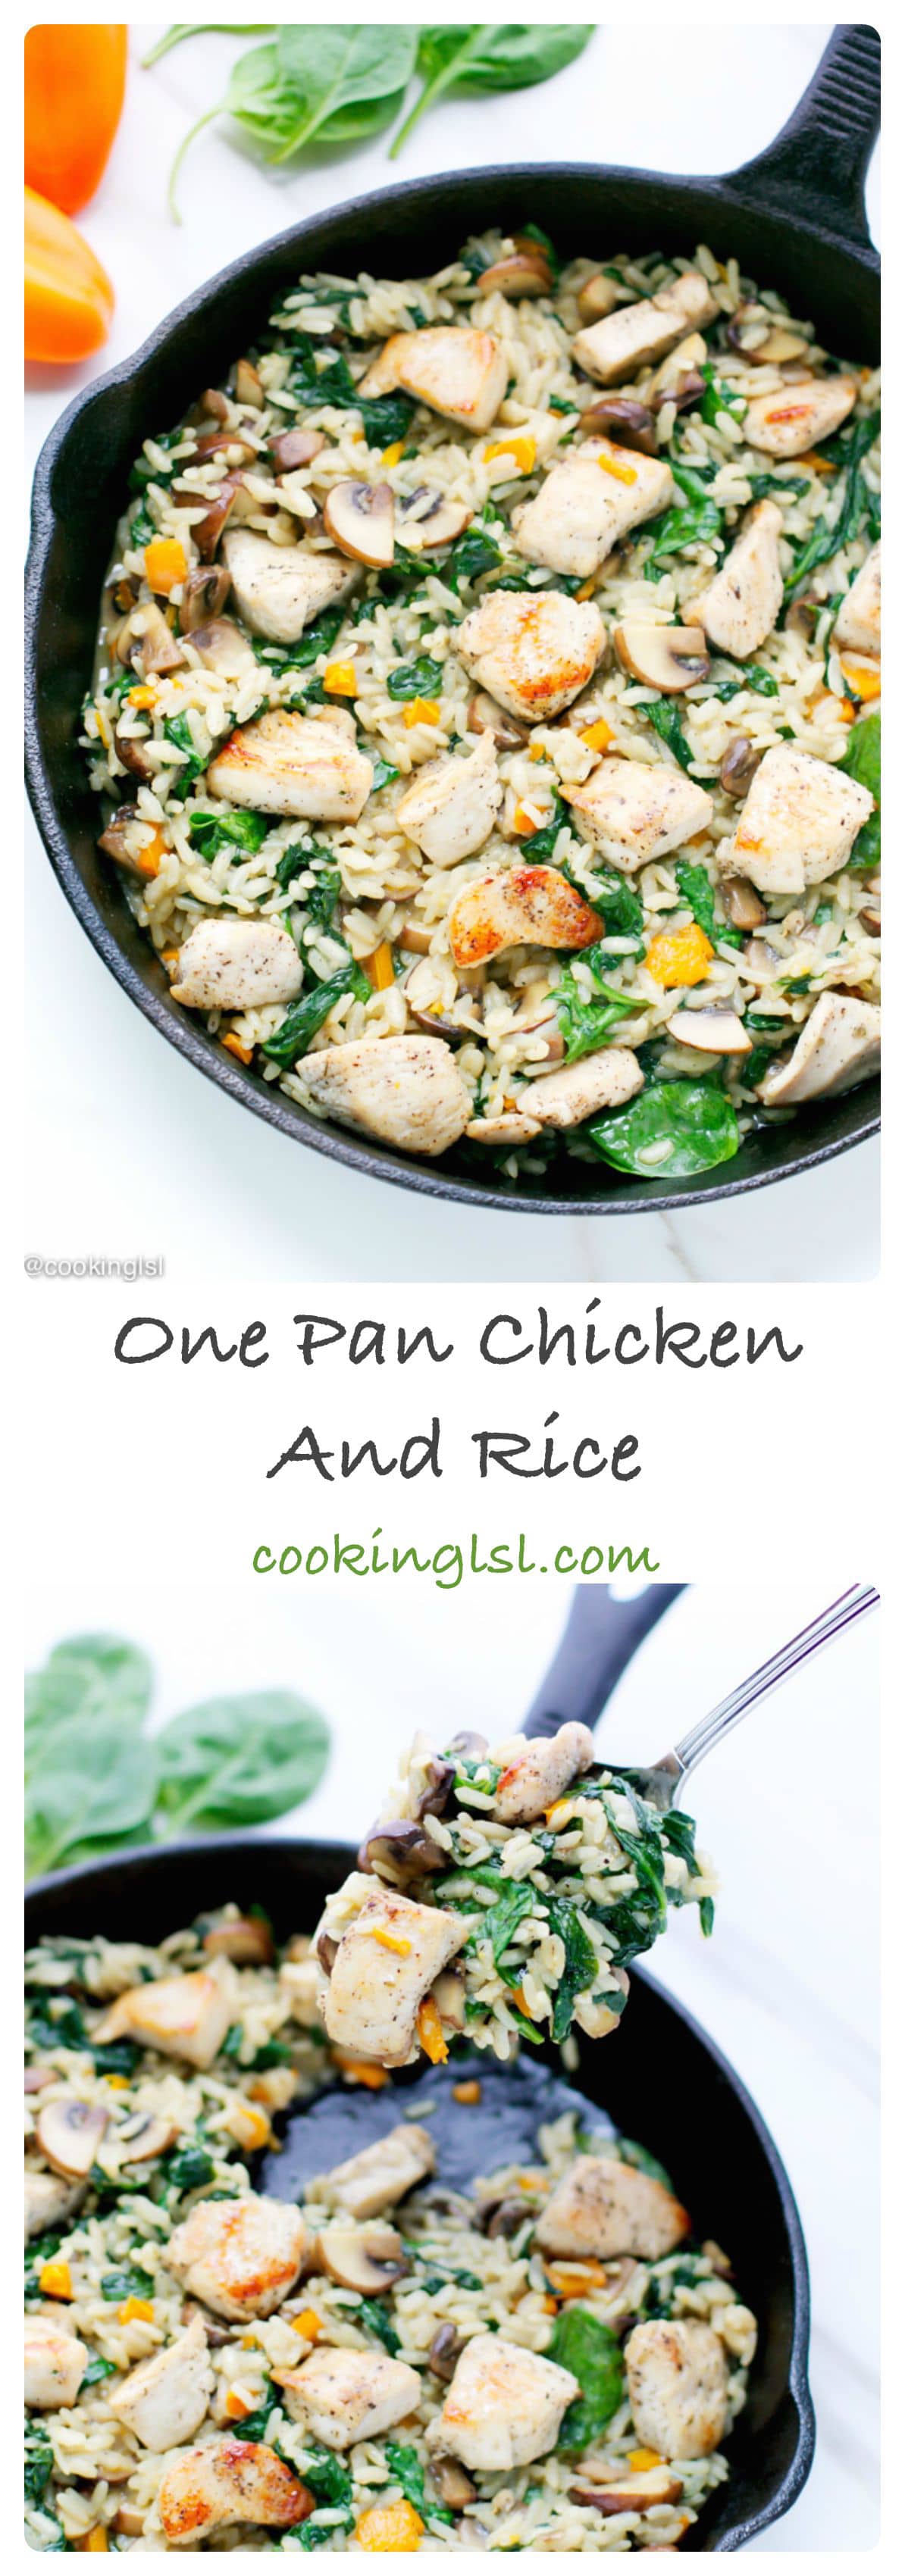 one-pan-chicken-and-rice-spinach-mushrooms-easy-dinner-fall-recipe